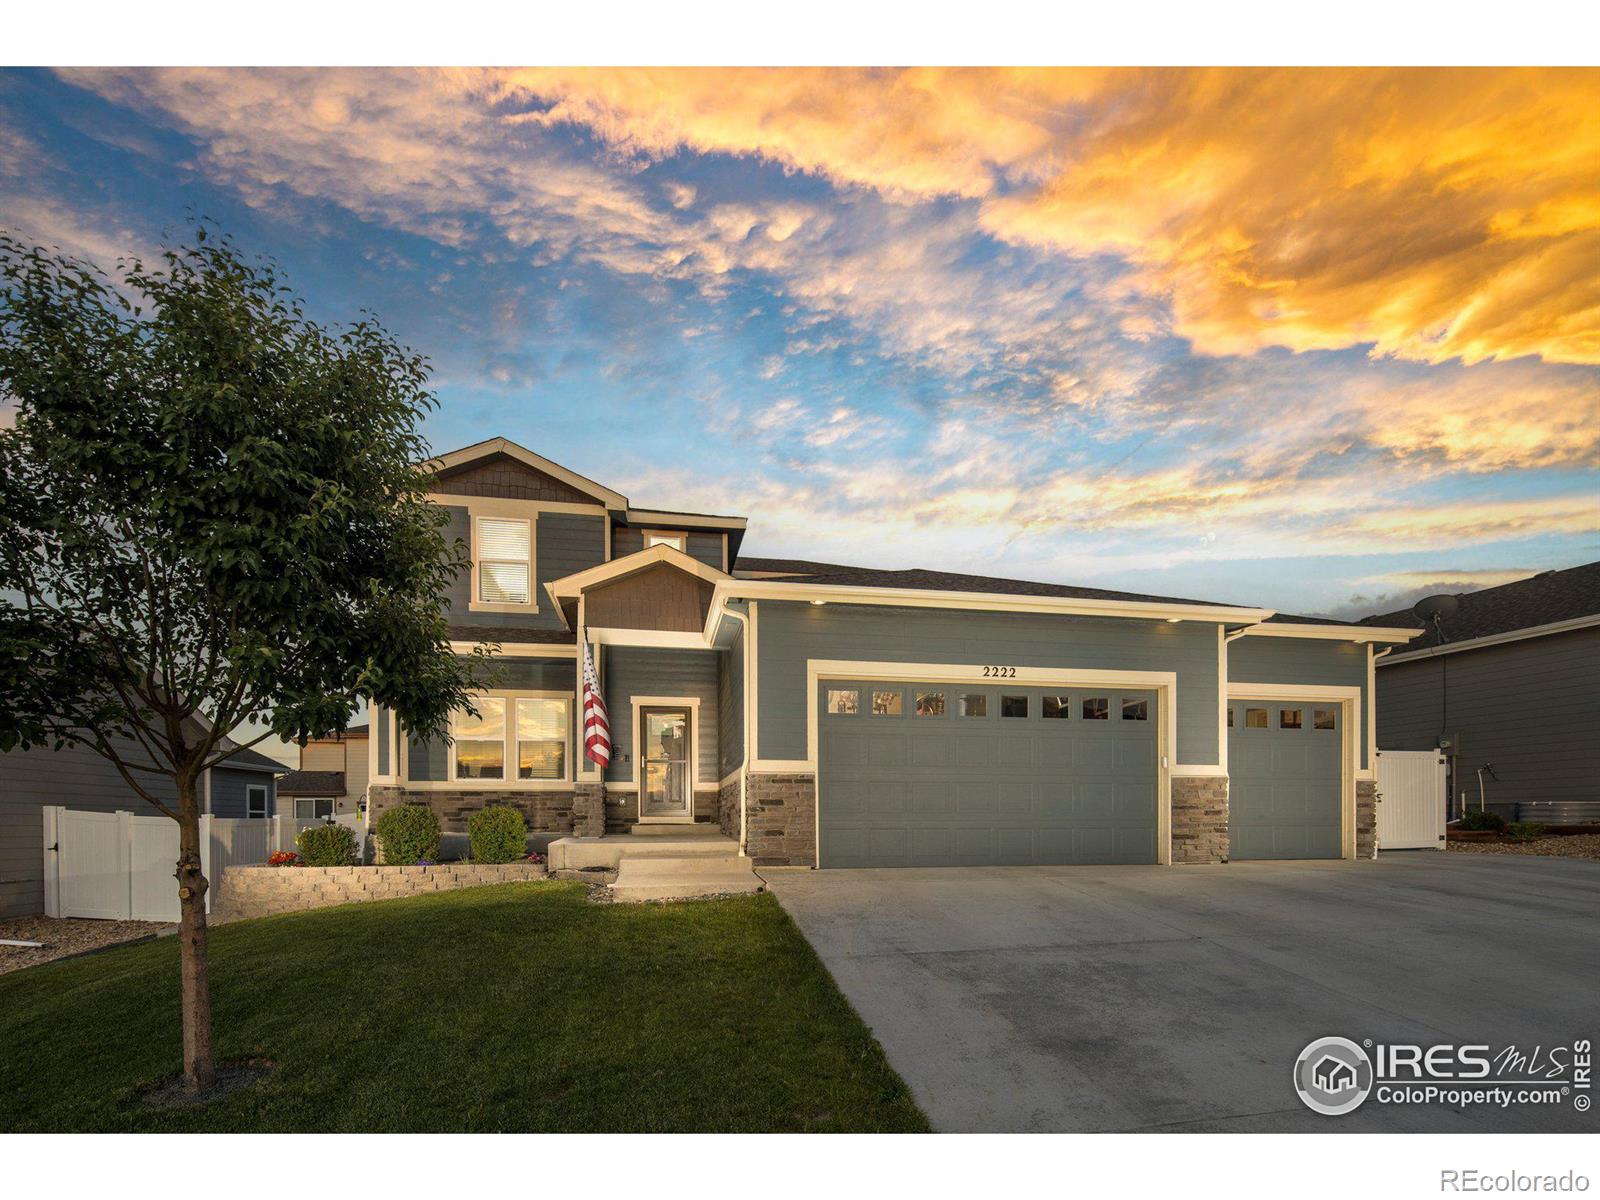 2222  75th Avenue, greeley MLS: 123456789991367 Beds: 6 Baths: 4 Price: $650,000